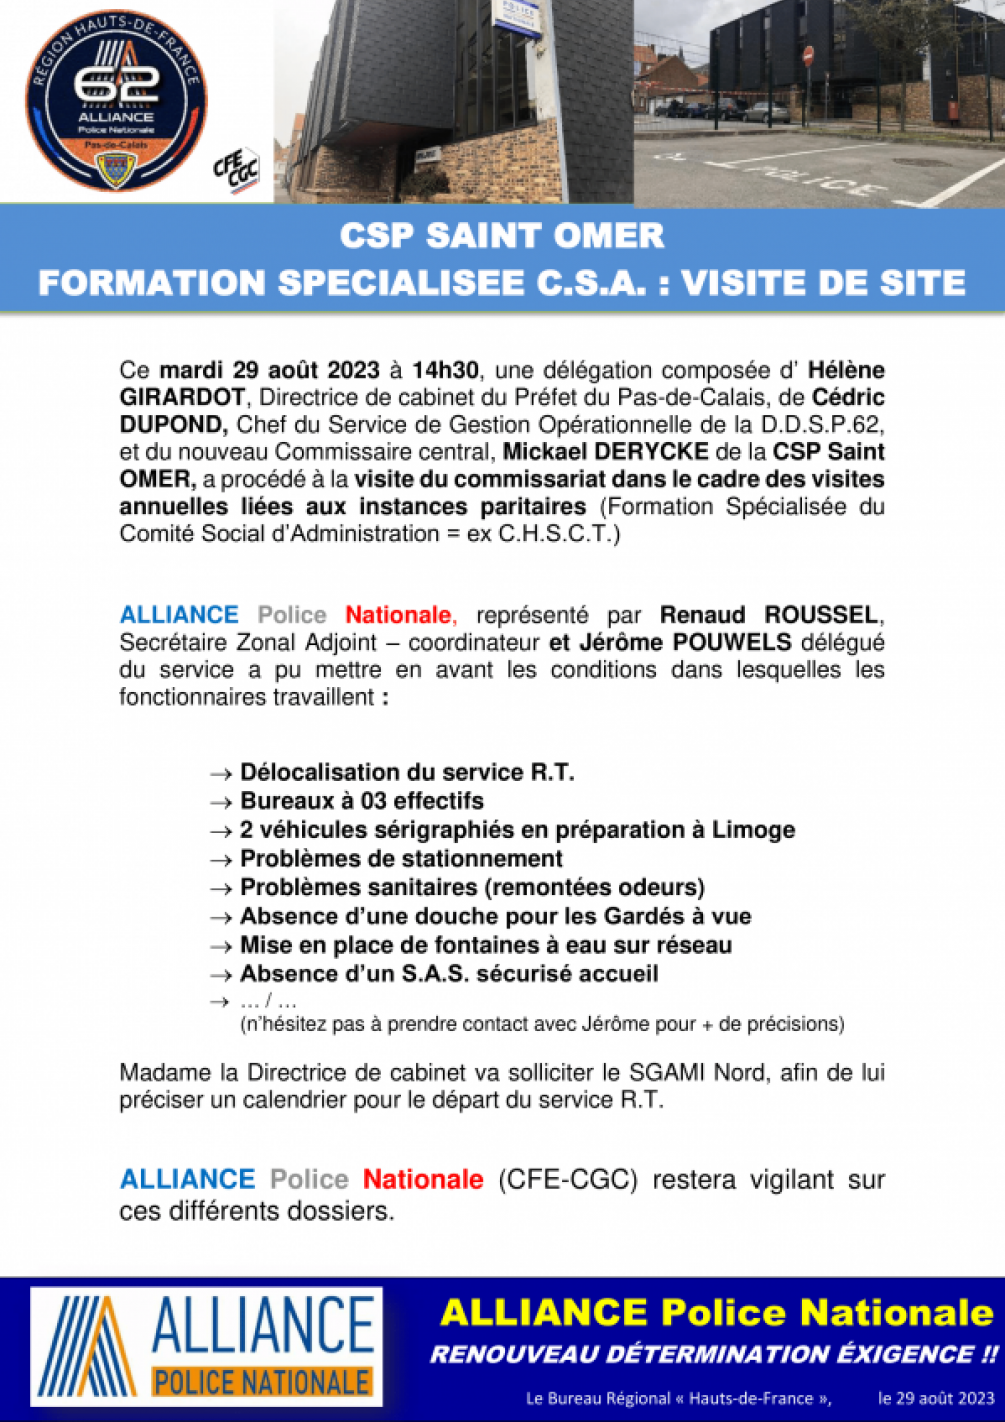 CSP SAINT OMER FORMATION SPECIALISEE C.S.A. : VISITE DE SITE